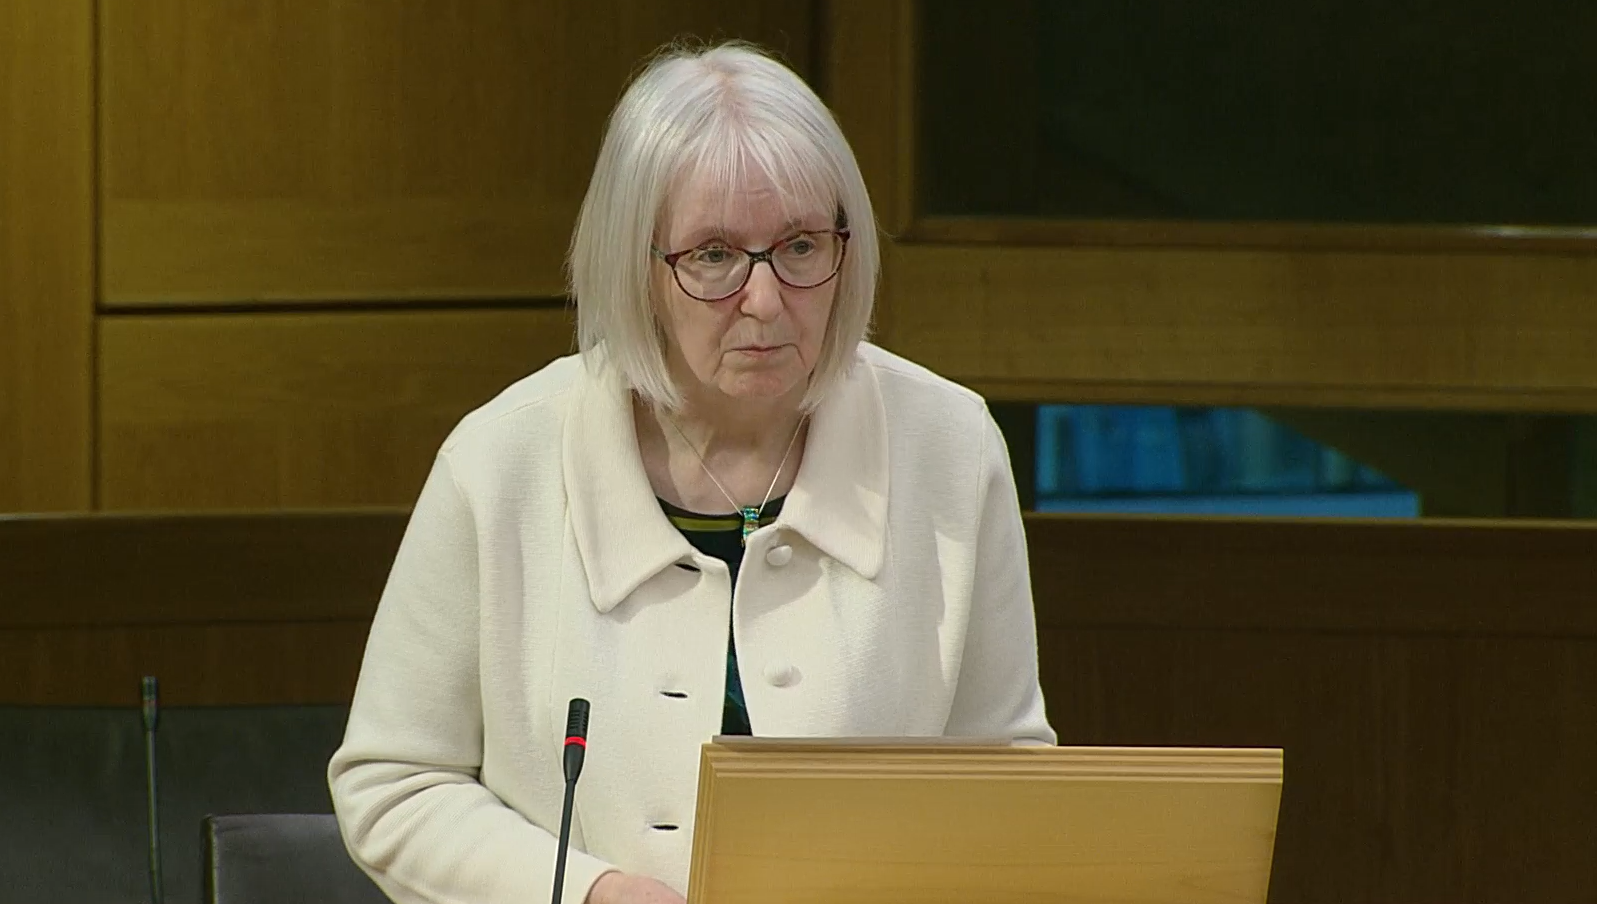 Beatrice Wishart stands behind a lectern in the scottish parliament